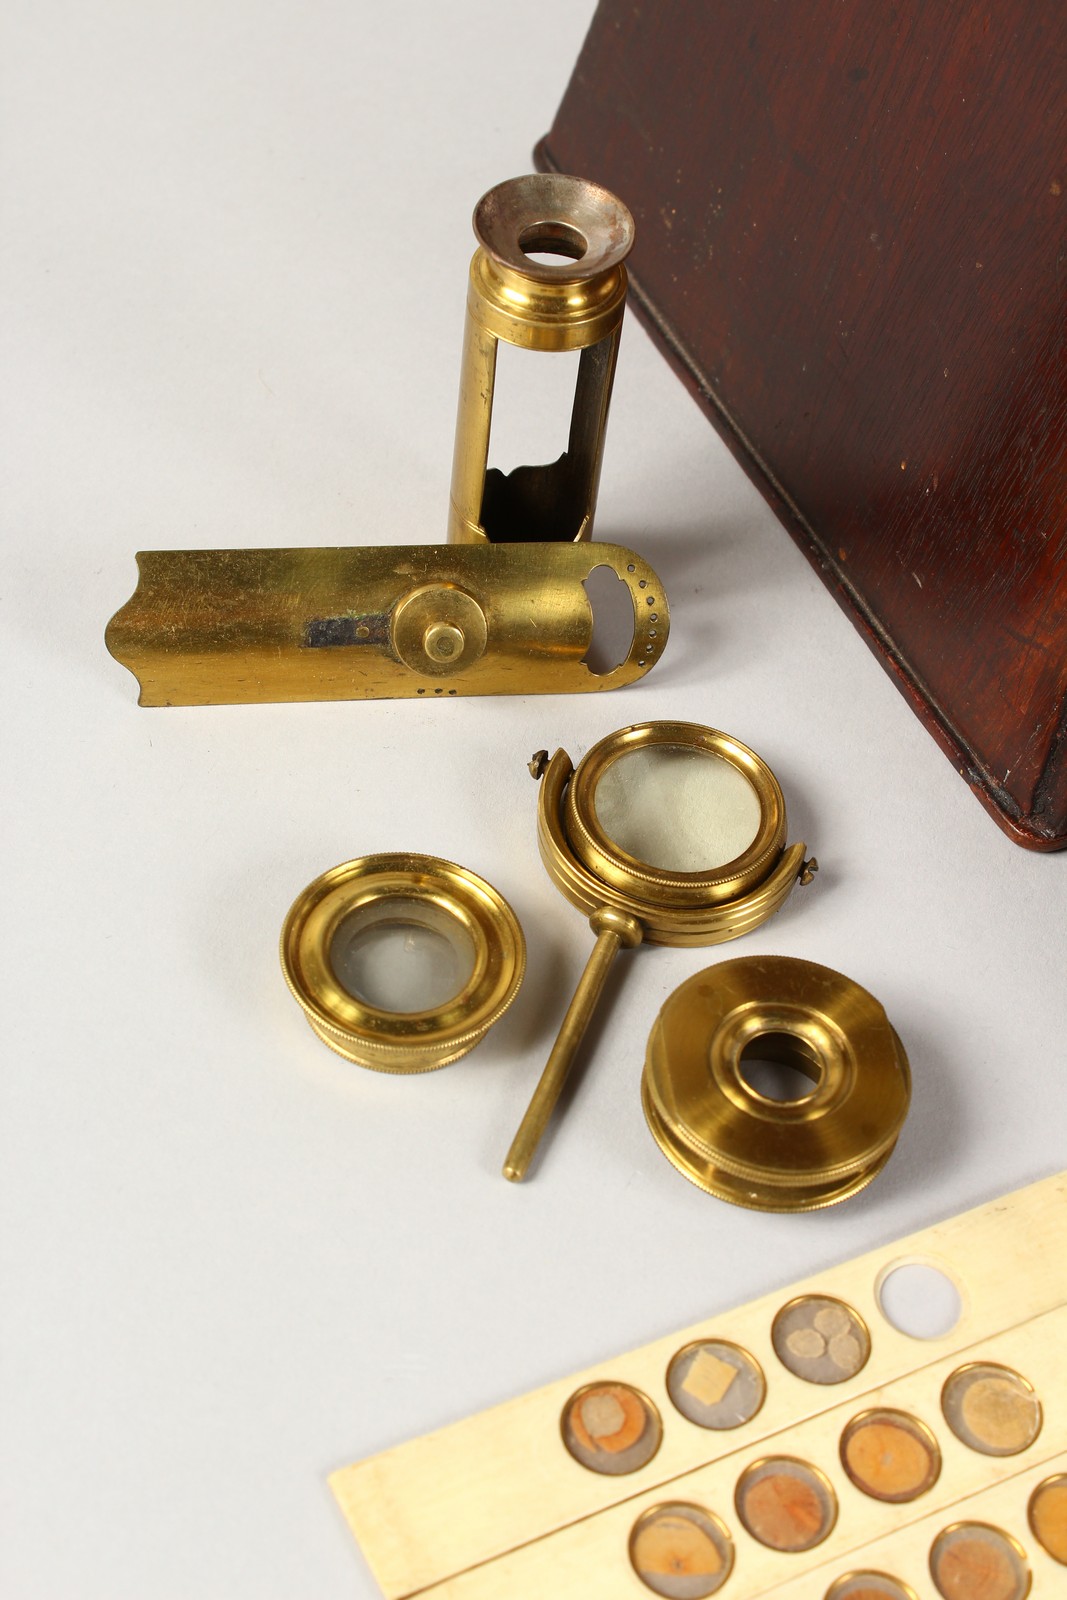 AN 18TH CENTURY BRASS CULPEPER MICROSCOPE by LINCOLN, LONDON, in an oak case, the sliding drawer - Image 4 of 10